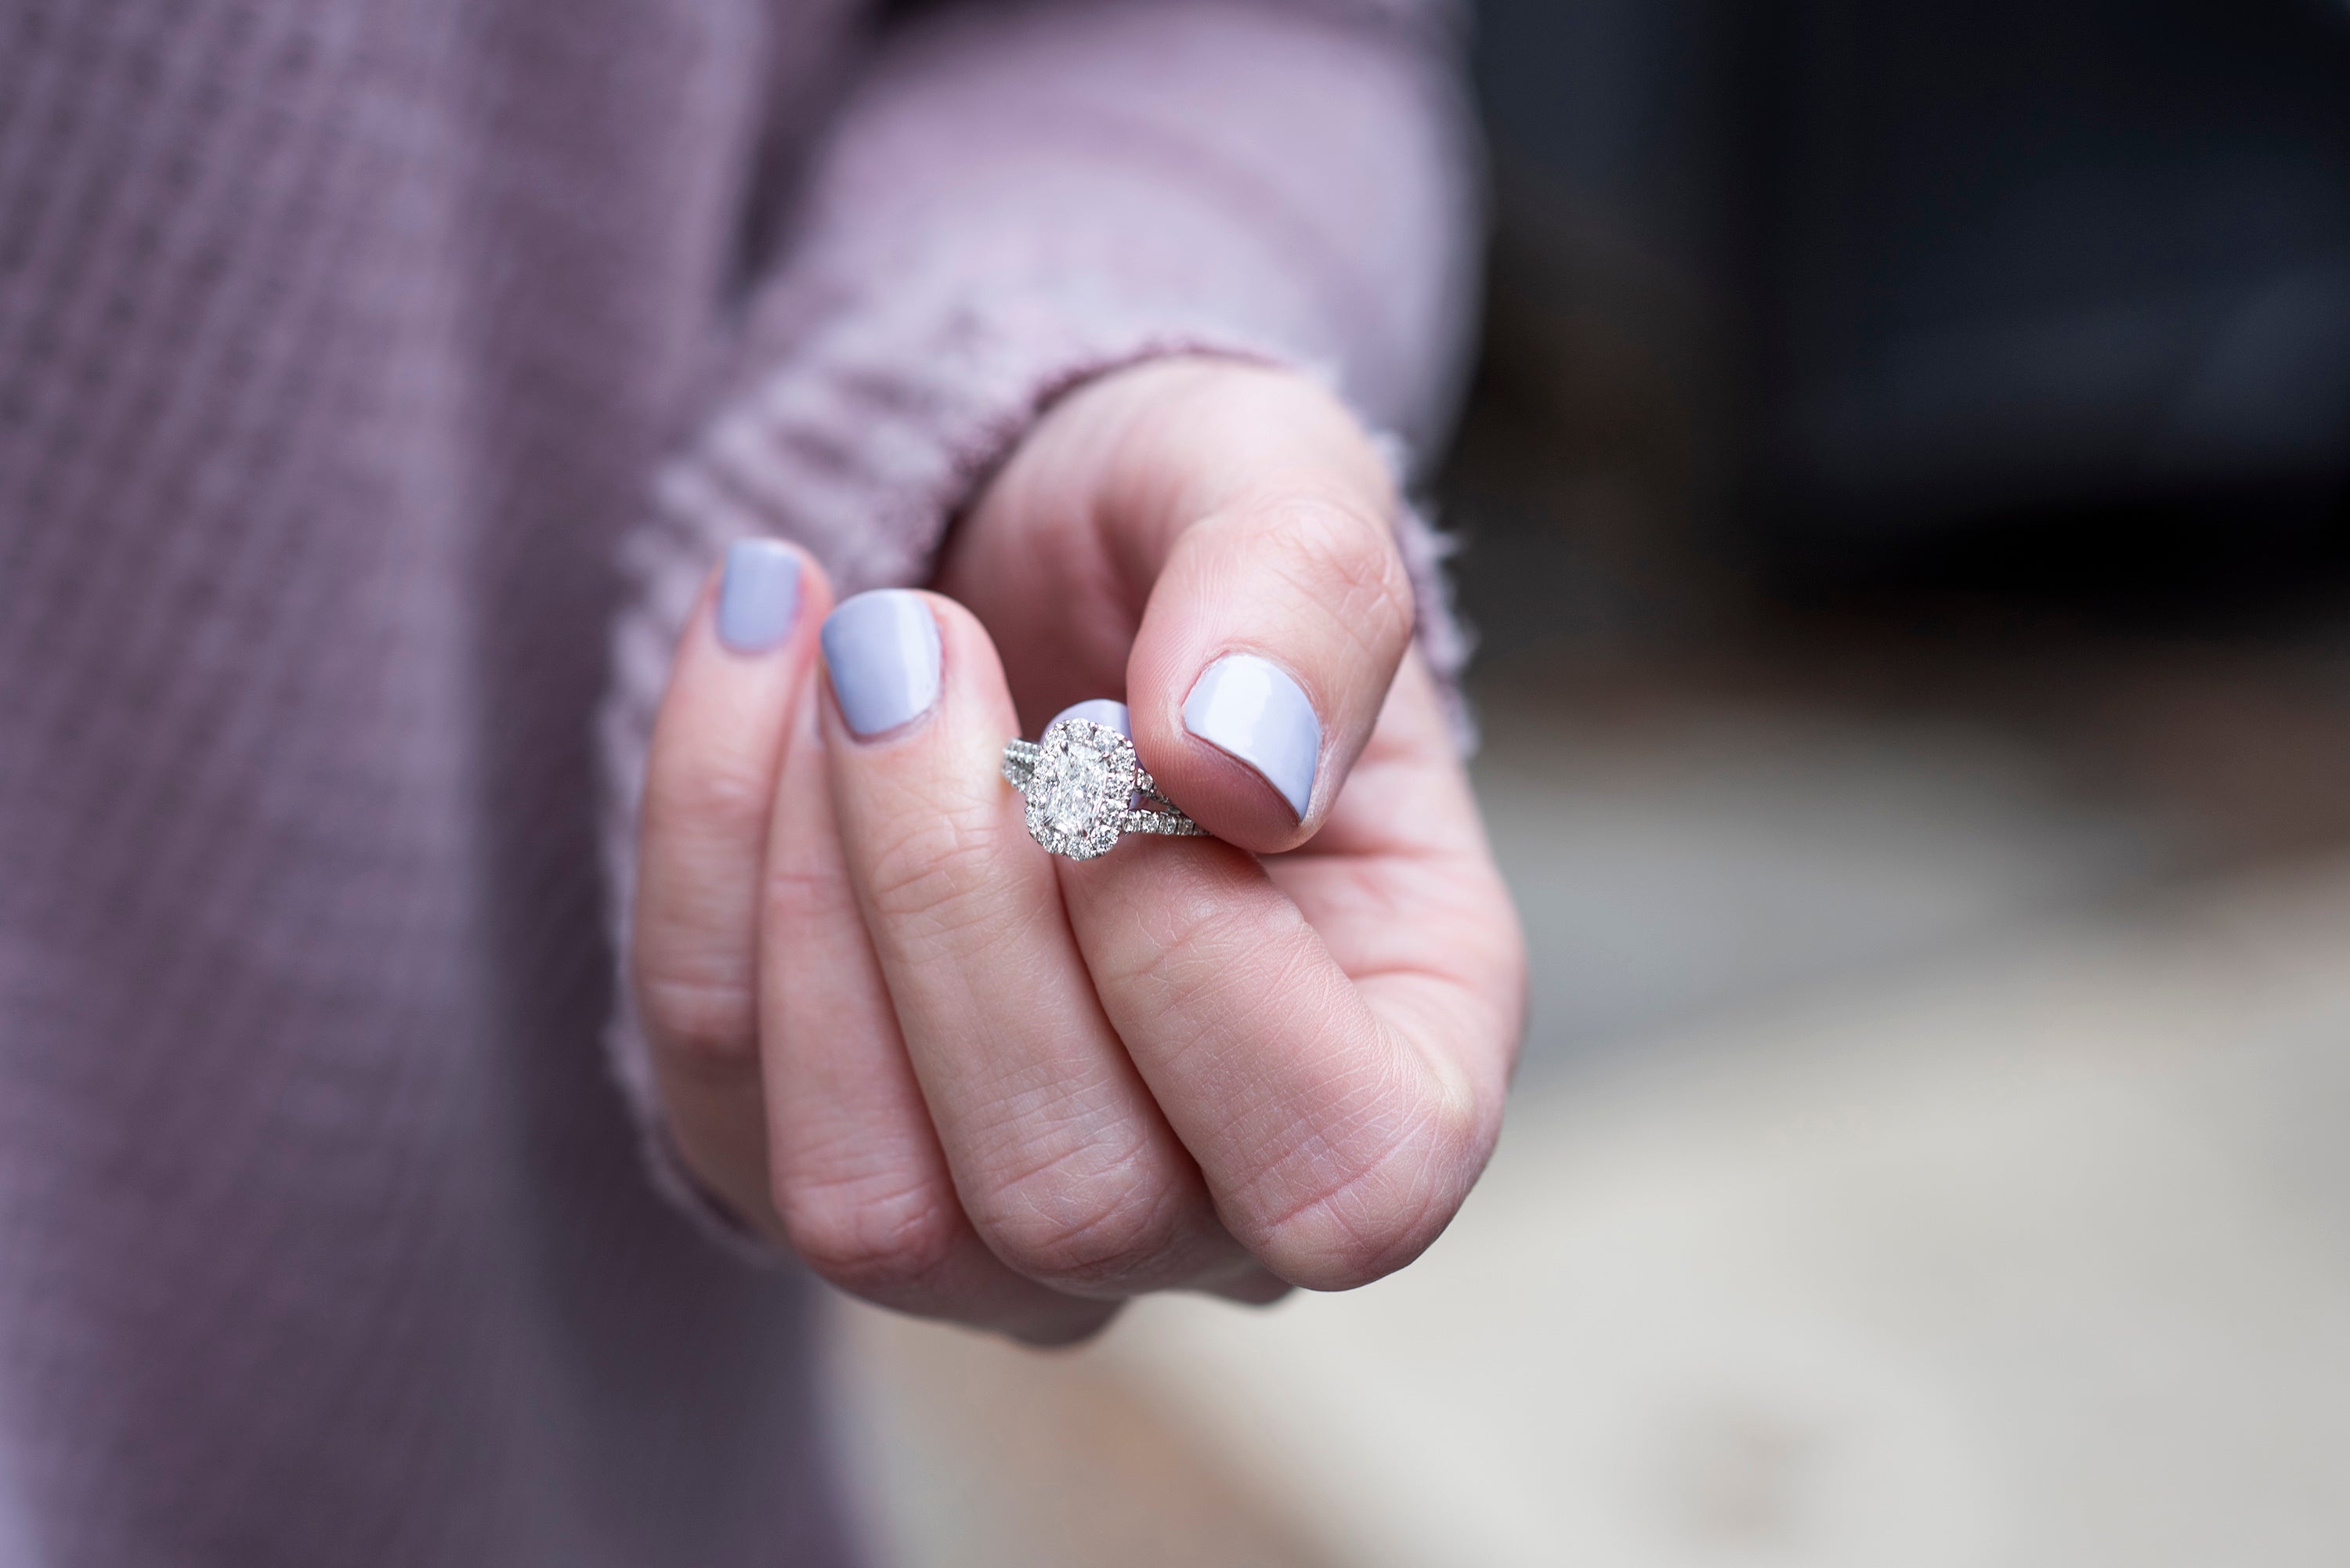 How To Clean Your Diamond Ring So It's As Sparkly As Day One